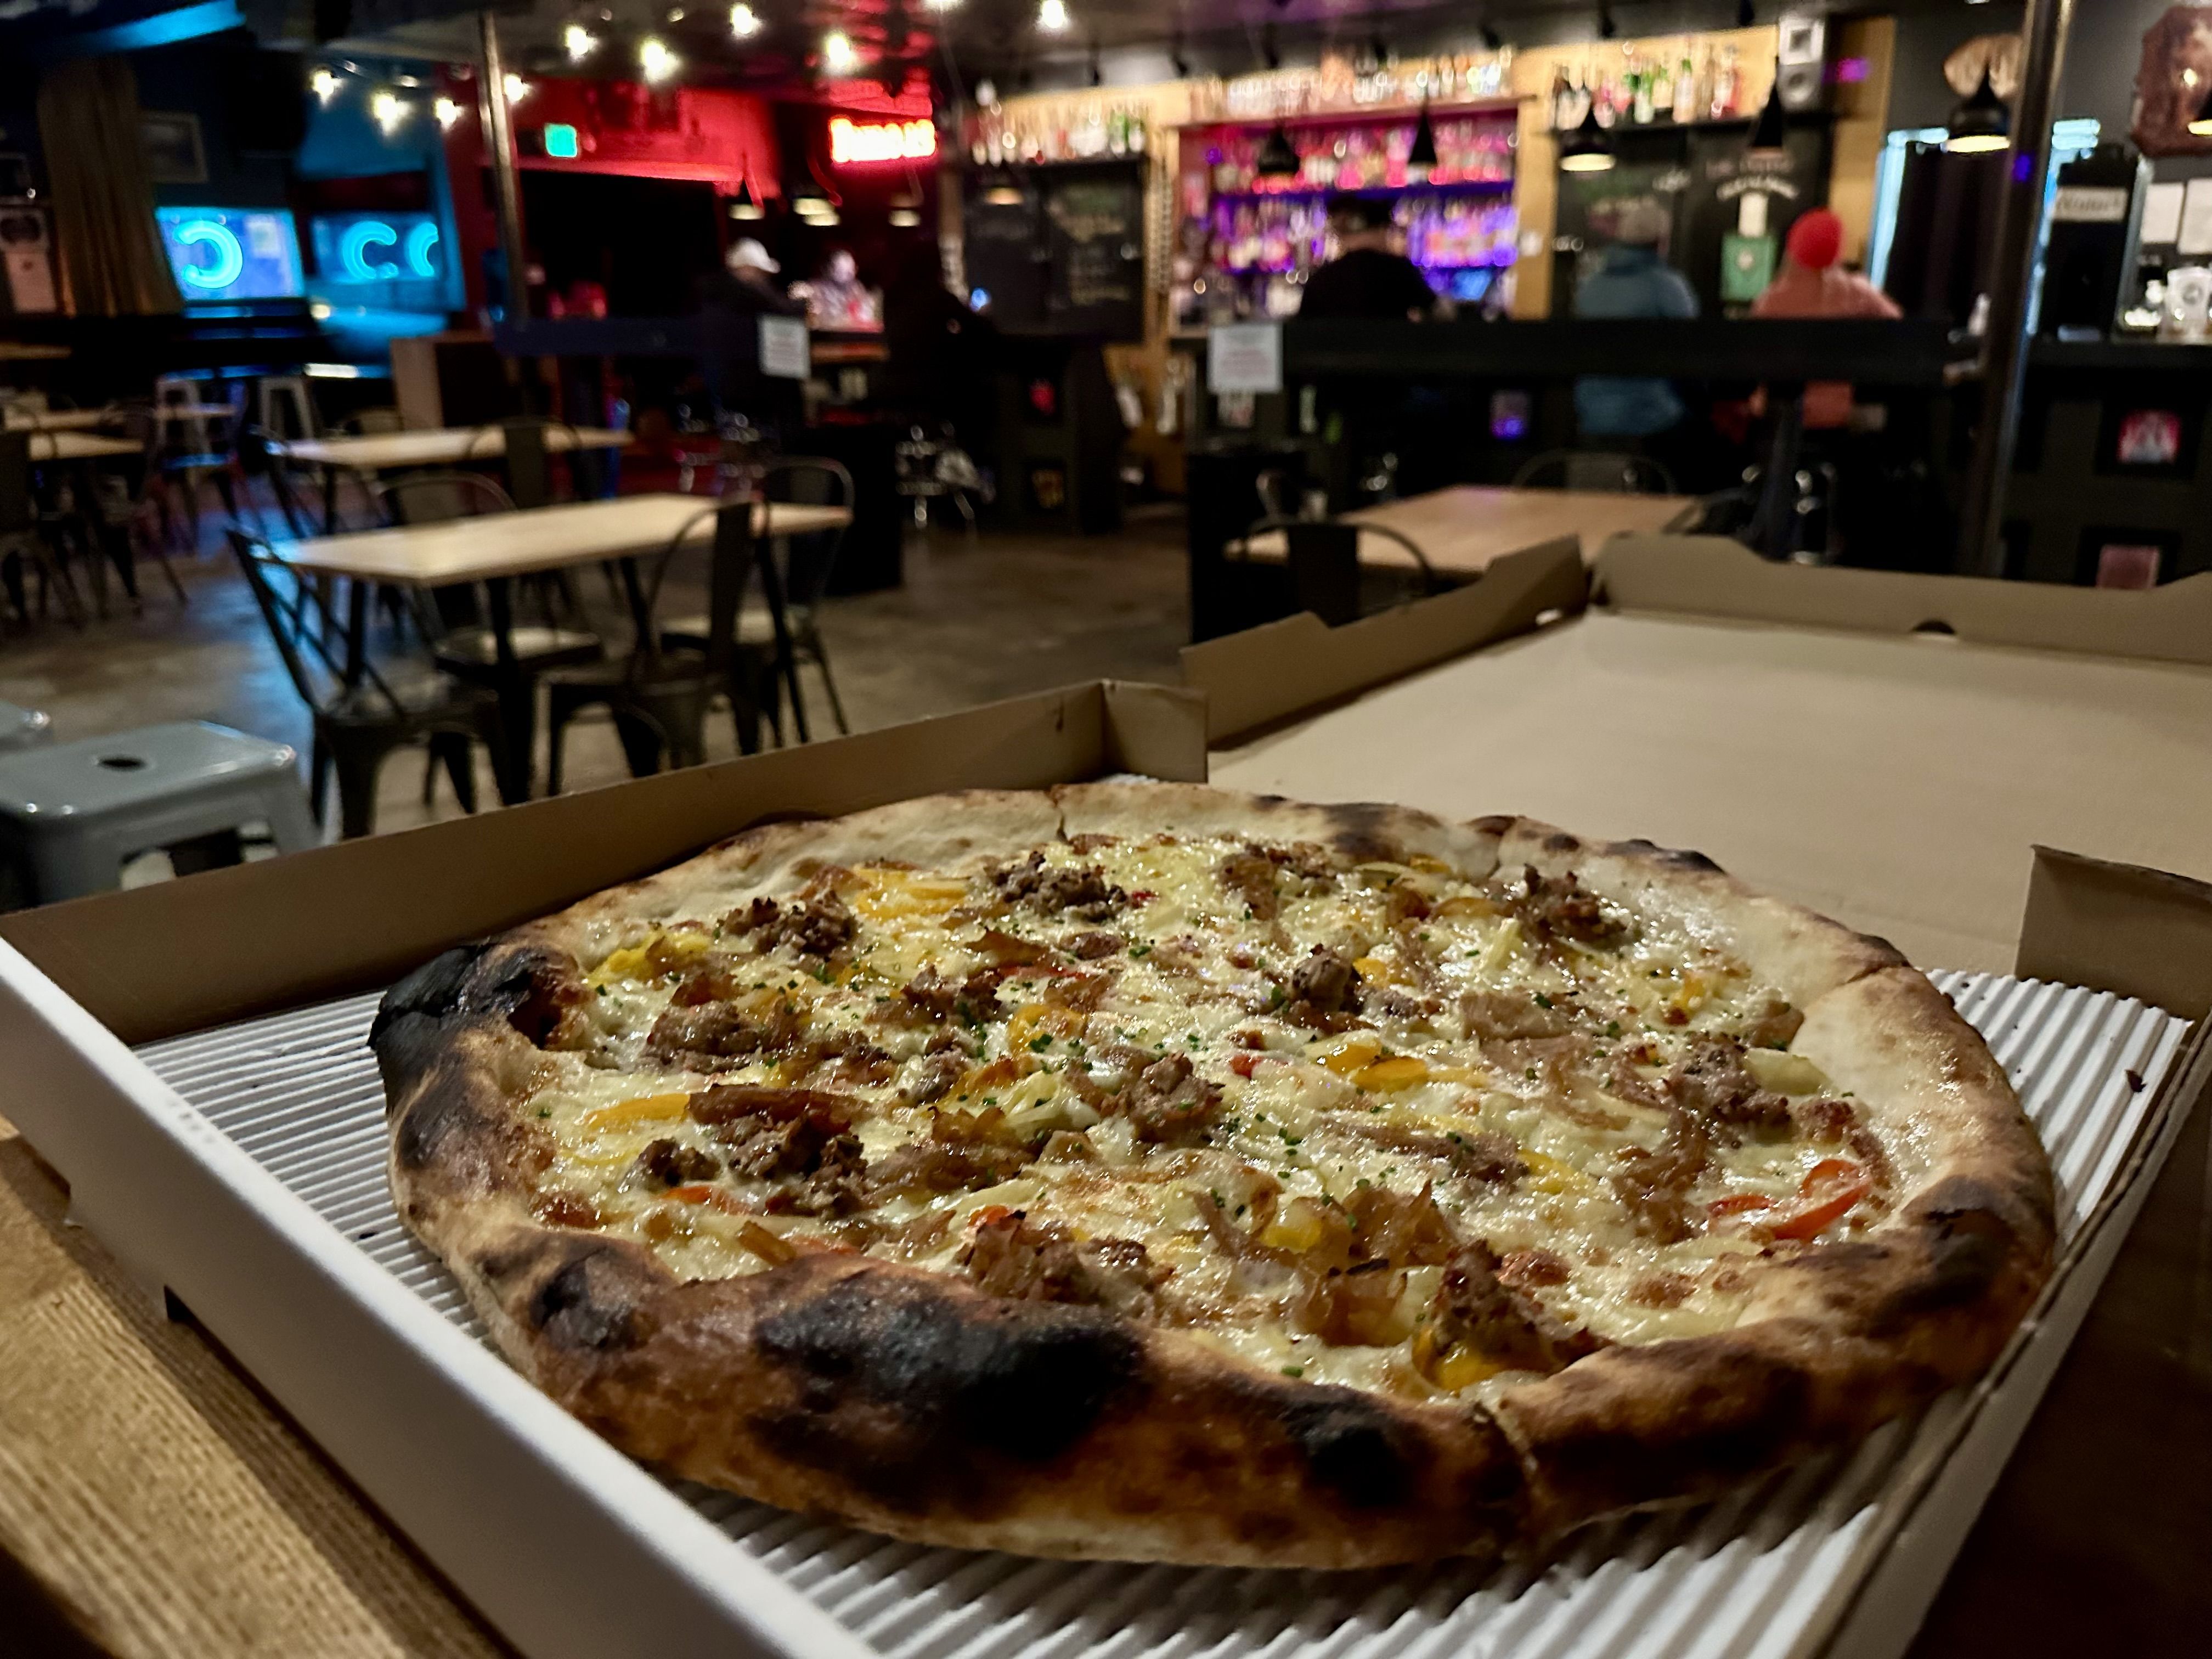 A pizza with sausage, onions and pickled peppers on a bar table with the bar shown in the background.